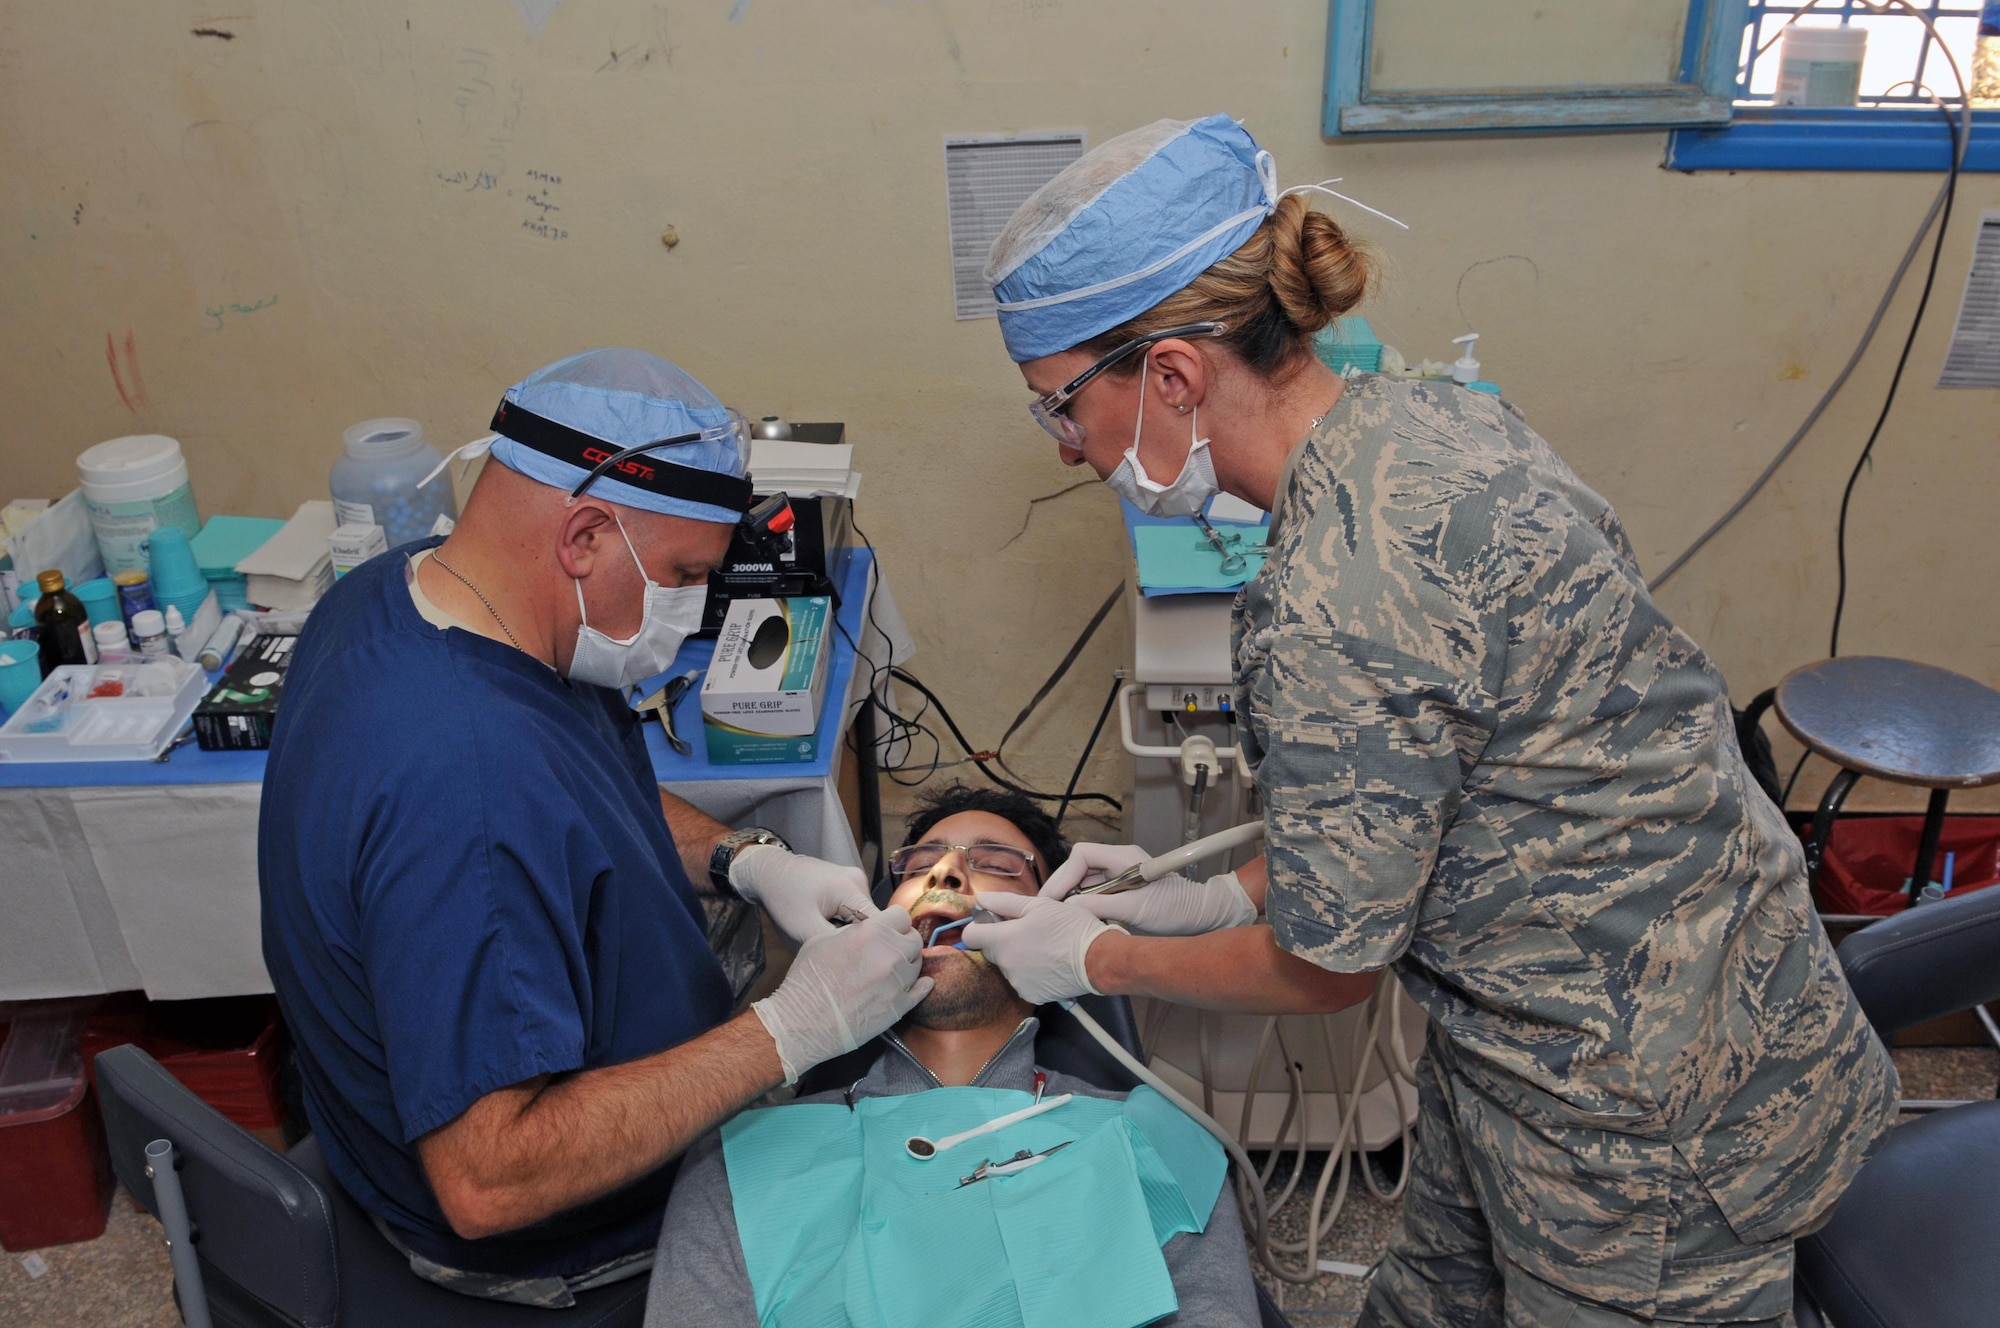 Lt. Col. Paul Anderson, a dentist with the 151st Medical Group, and Senior Airman Kristin Bentley, a dental technician with the 151st MDG, provide dental care in conjunction with their Moroccan counterparts at Issafen, Morocco on April 25, 2017 during African Lion. (U.S. Air National Guard photo by Tech. Sgt. Annie Edwards)